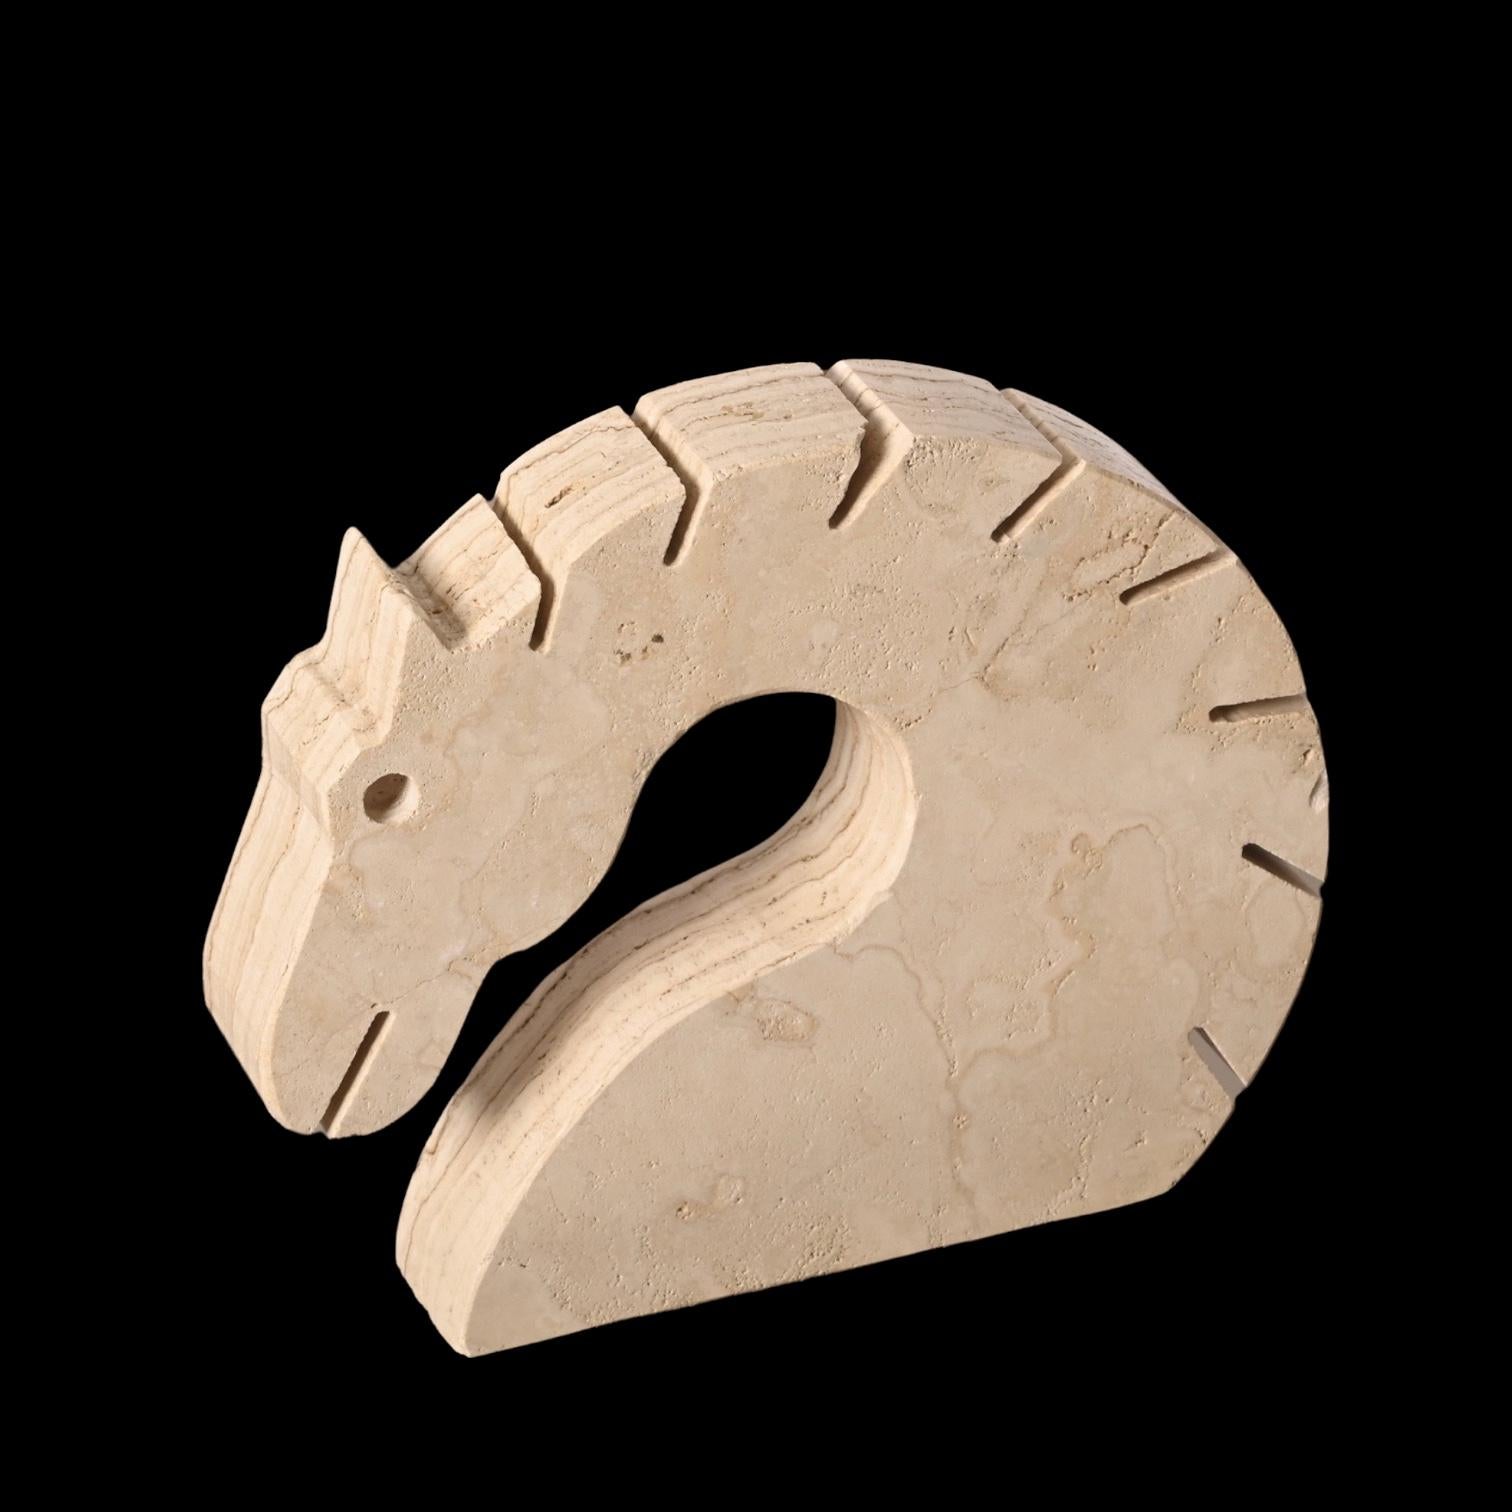 Mid-century horse sculpture made in Italy in Travertine Marble, by Fratelli Mannelli. marvelous piece to enrich an ambient.

A small chip visible on the last photos as indicated by the red arrow which does not affect the beauty of the